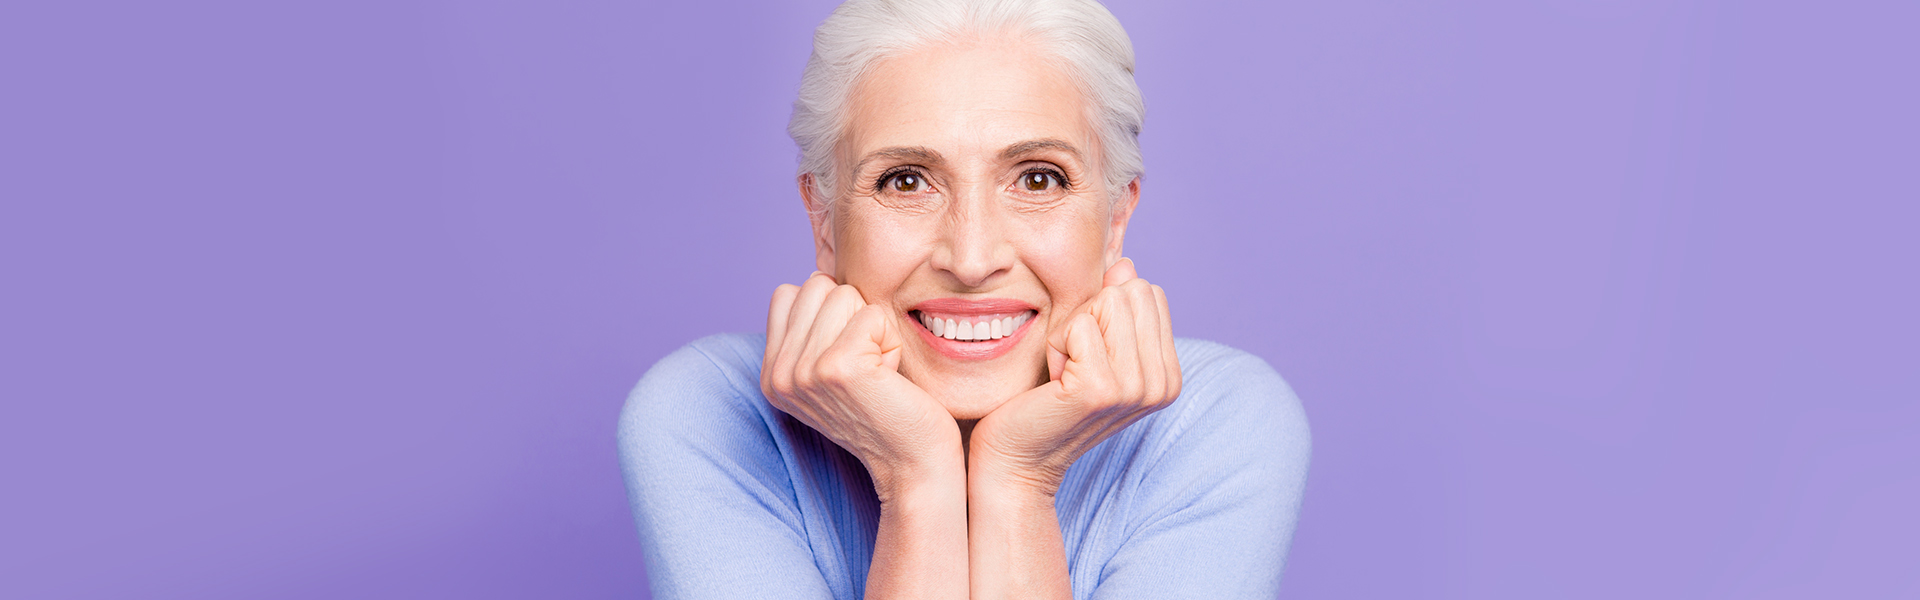 Getting Immediate Dentures and After-Care Tips